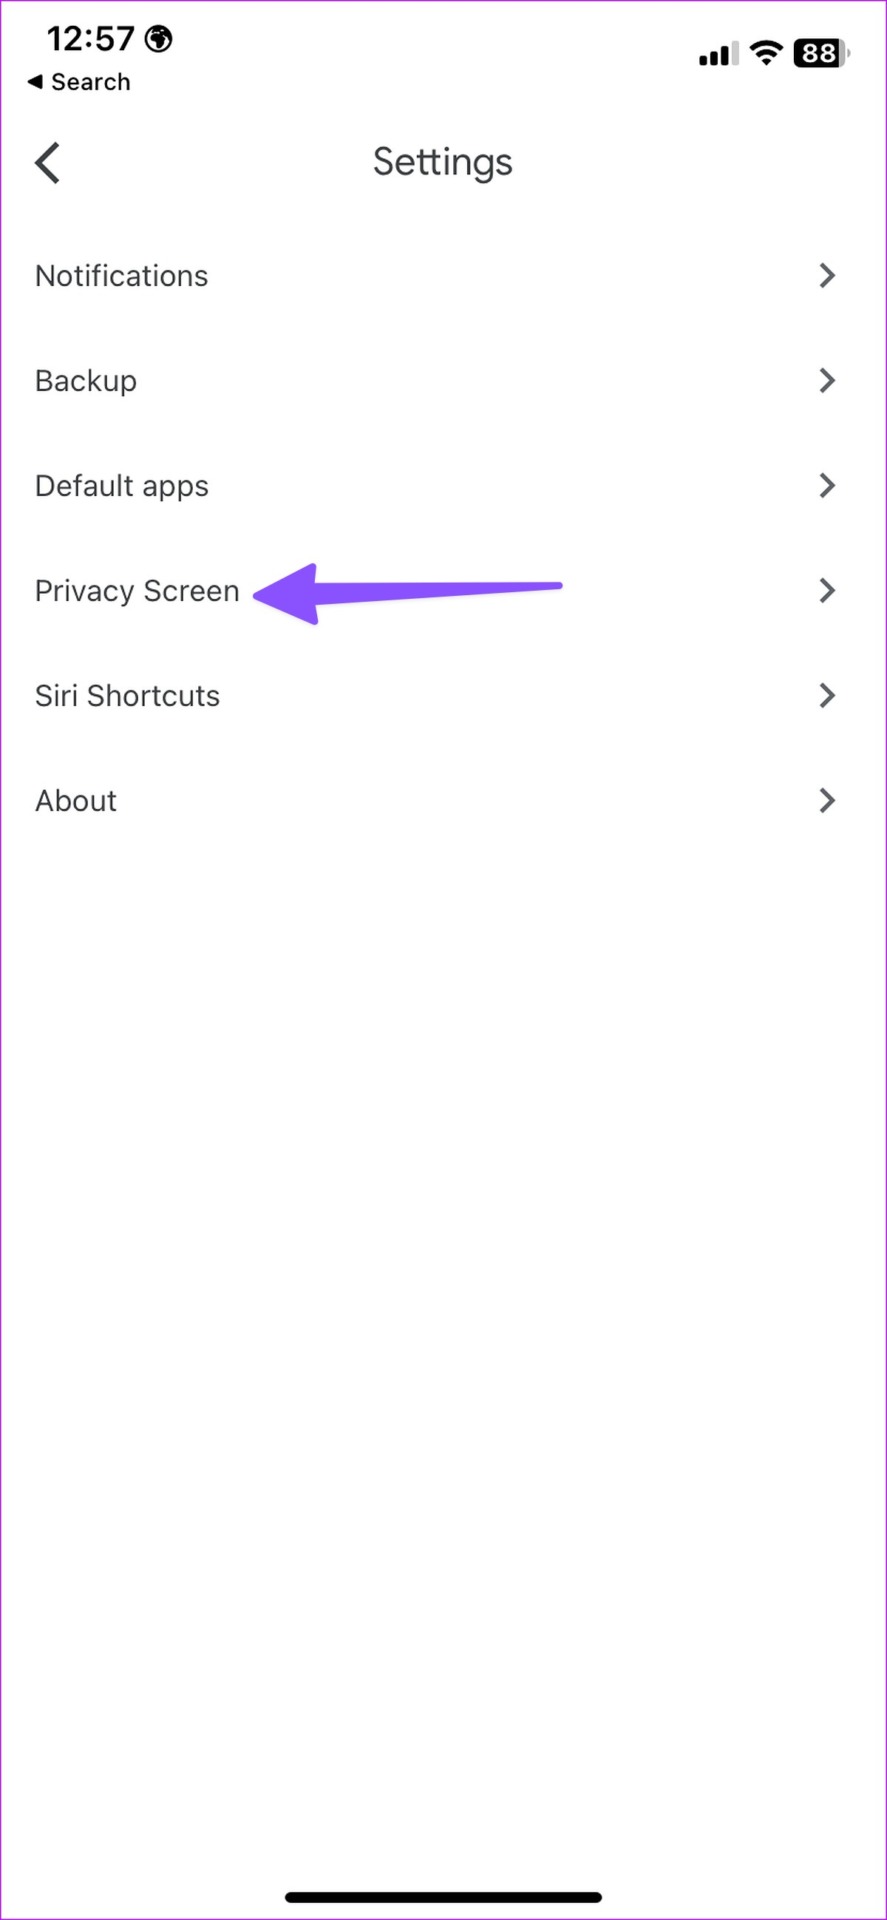 privacy screen in google drive on iPhone